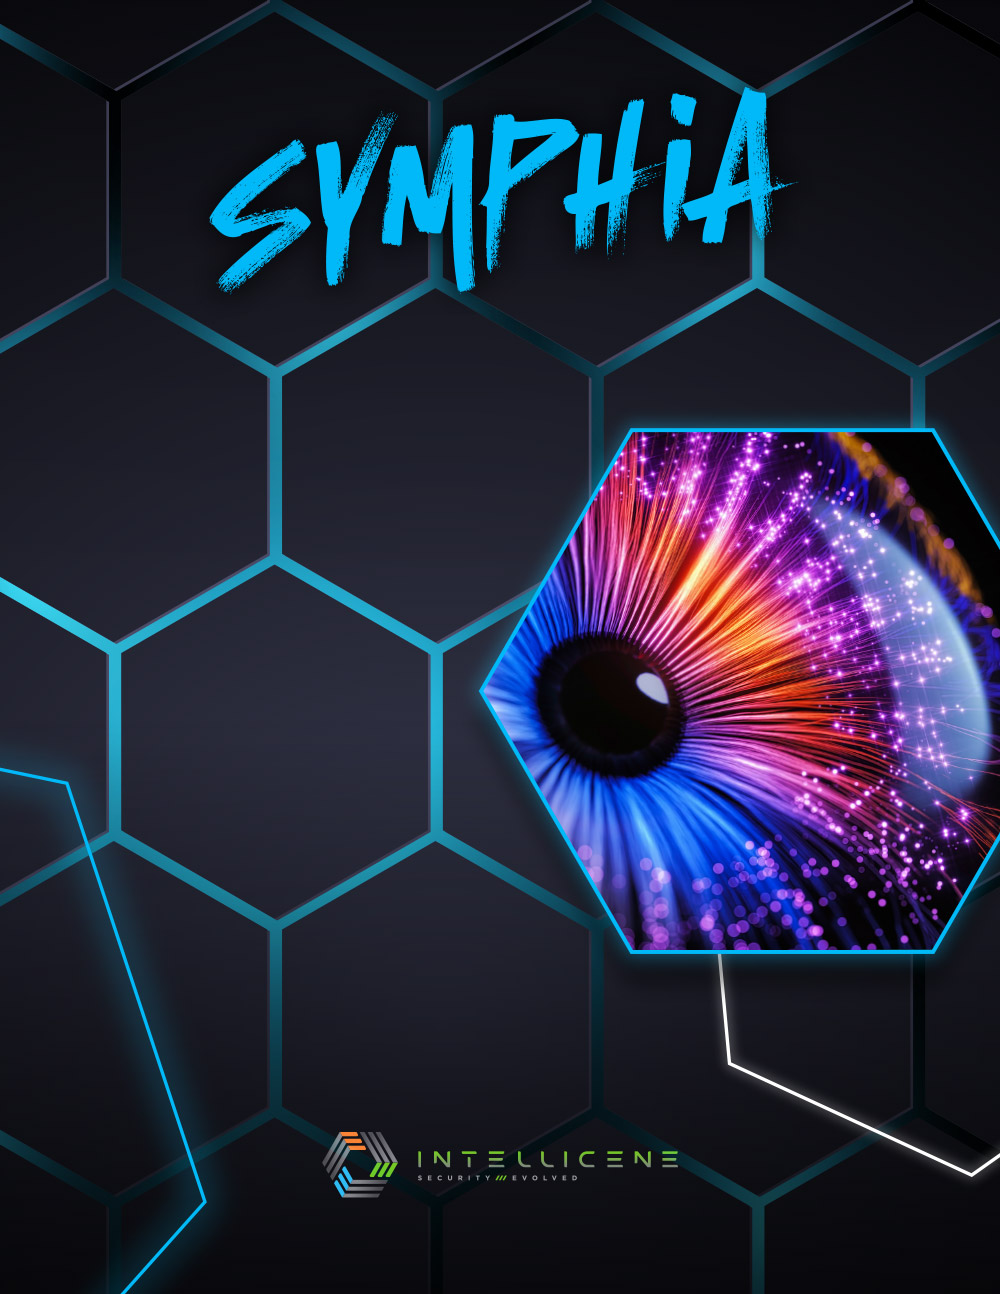 Cover of the Symphia overview brochure